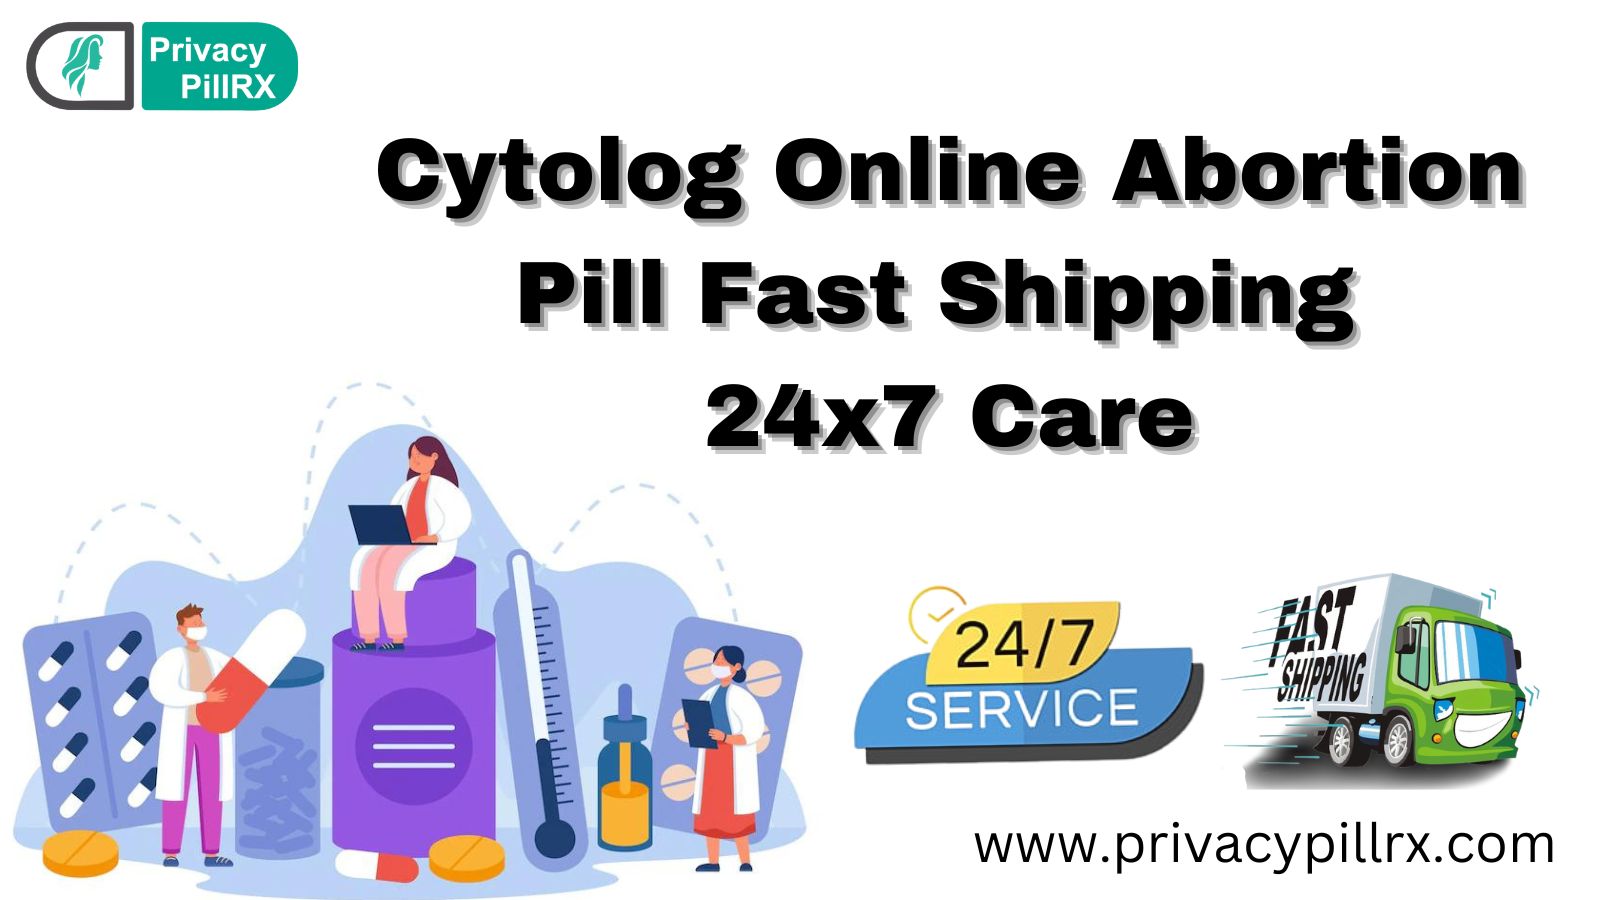 Cytolog Online Abortion Pill Fast Shipping 24x7 Care - photo